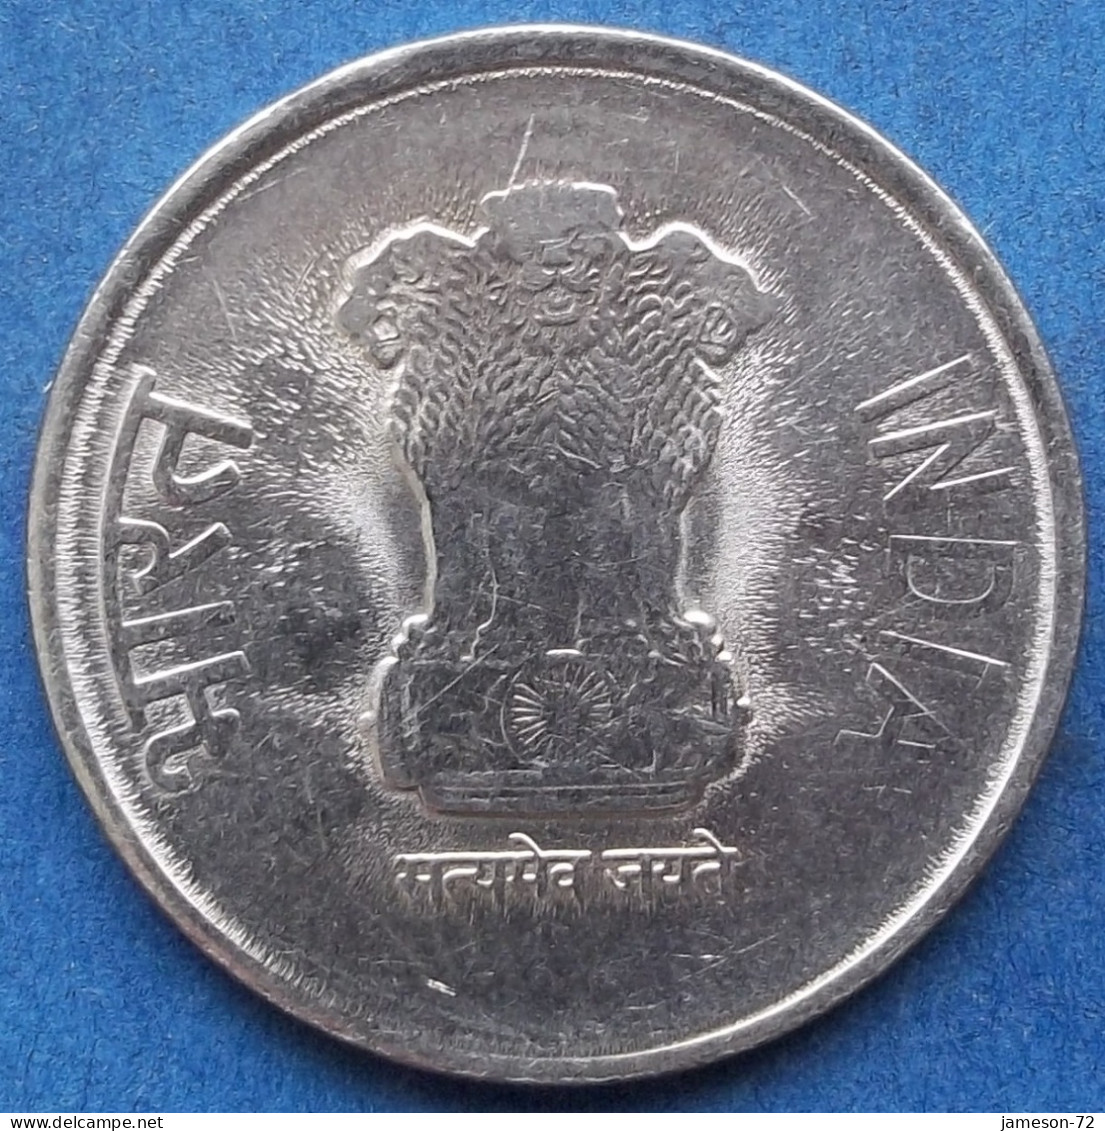 INDIA - 2 Rupees 2018 "Lotus Flowers" KM# 395 Republic Decimal Coinage (1957) - Edelweiss Coins - Georgië